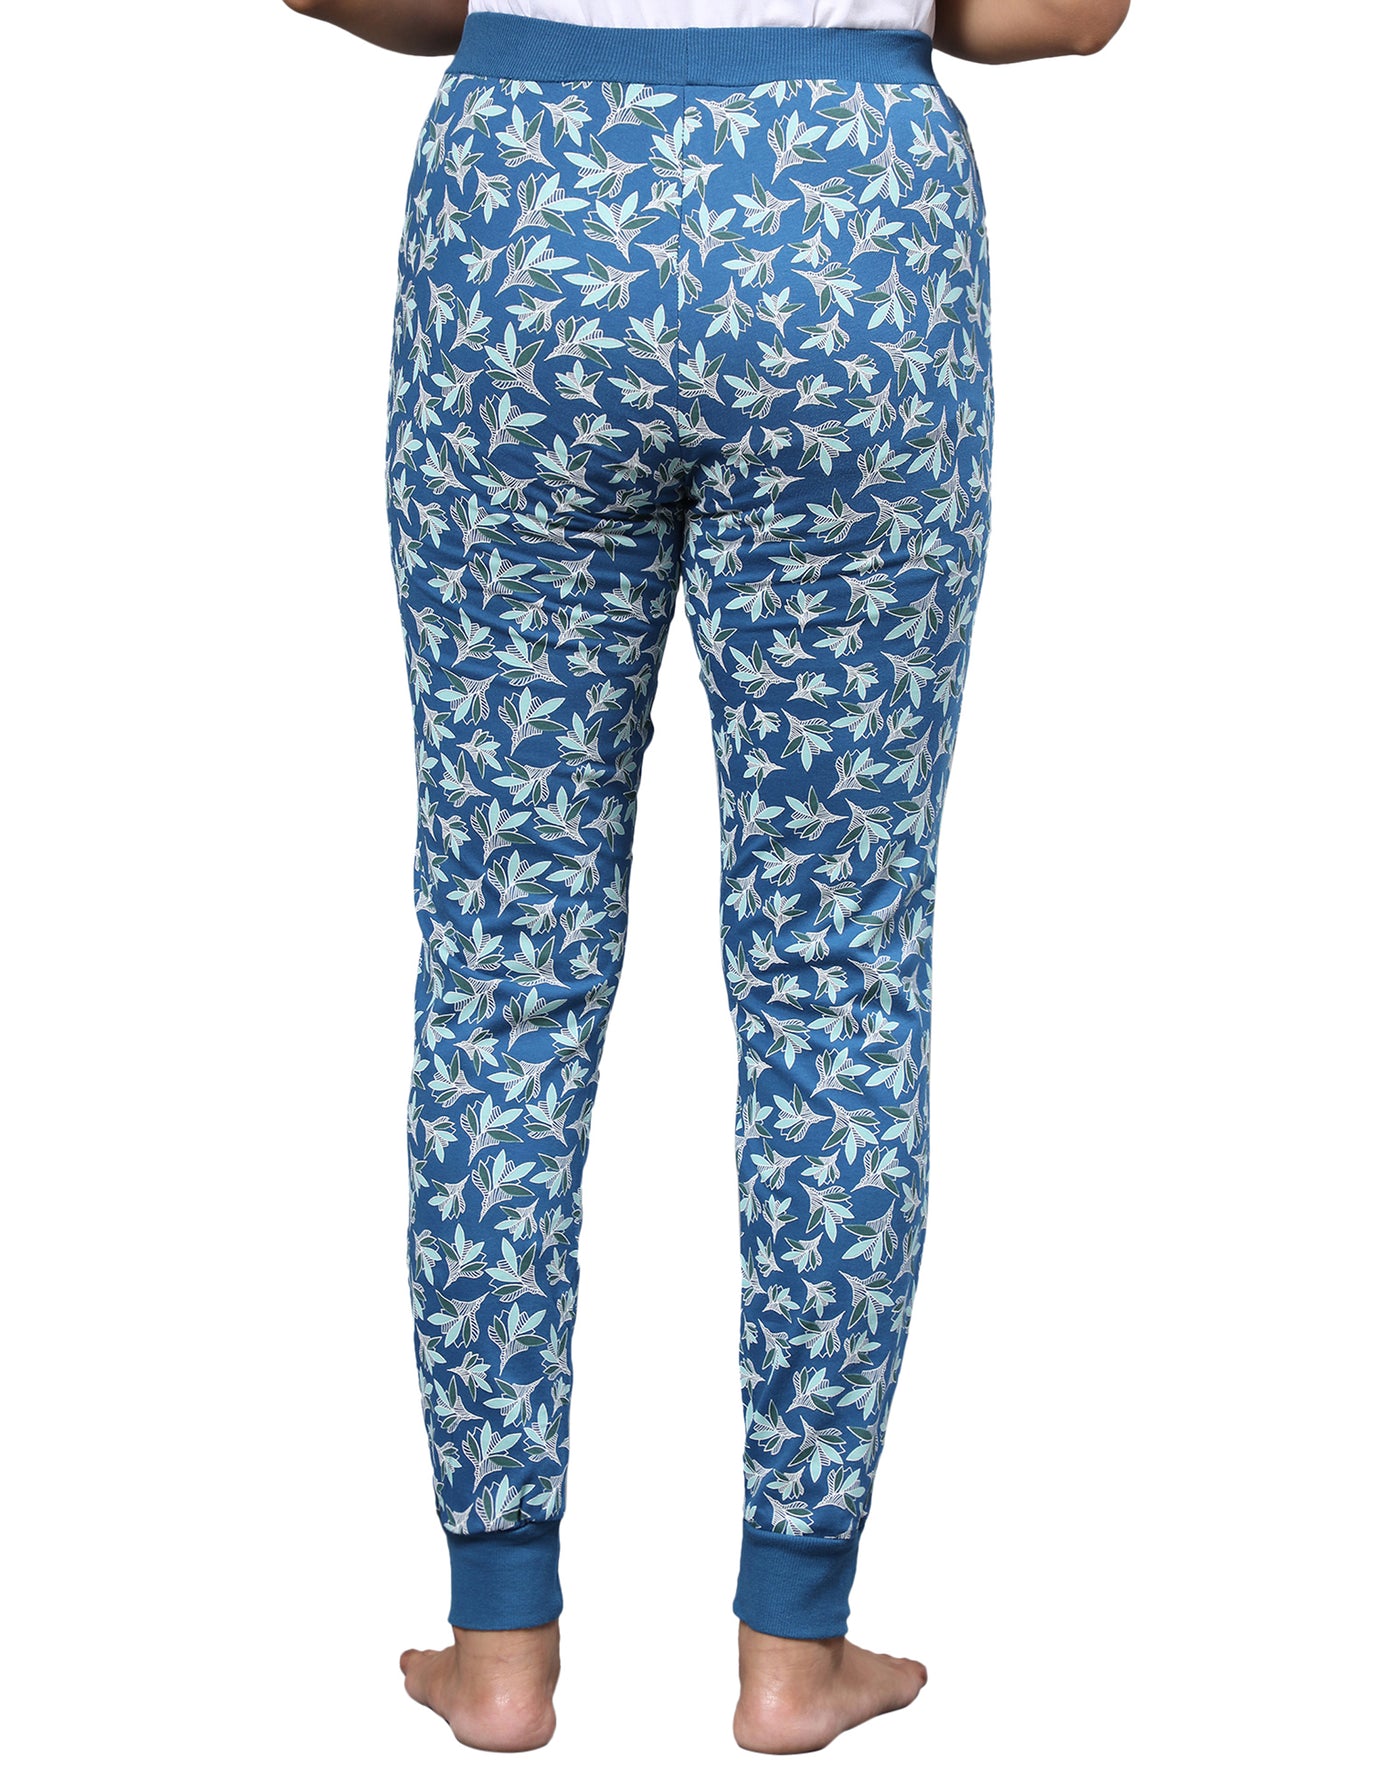 Lounge Pant for Women-Blue Floral